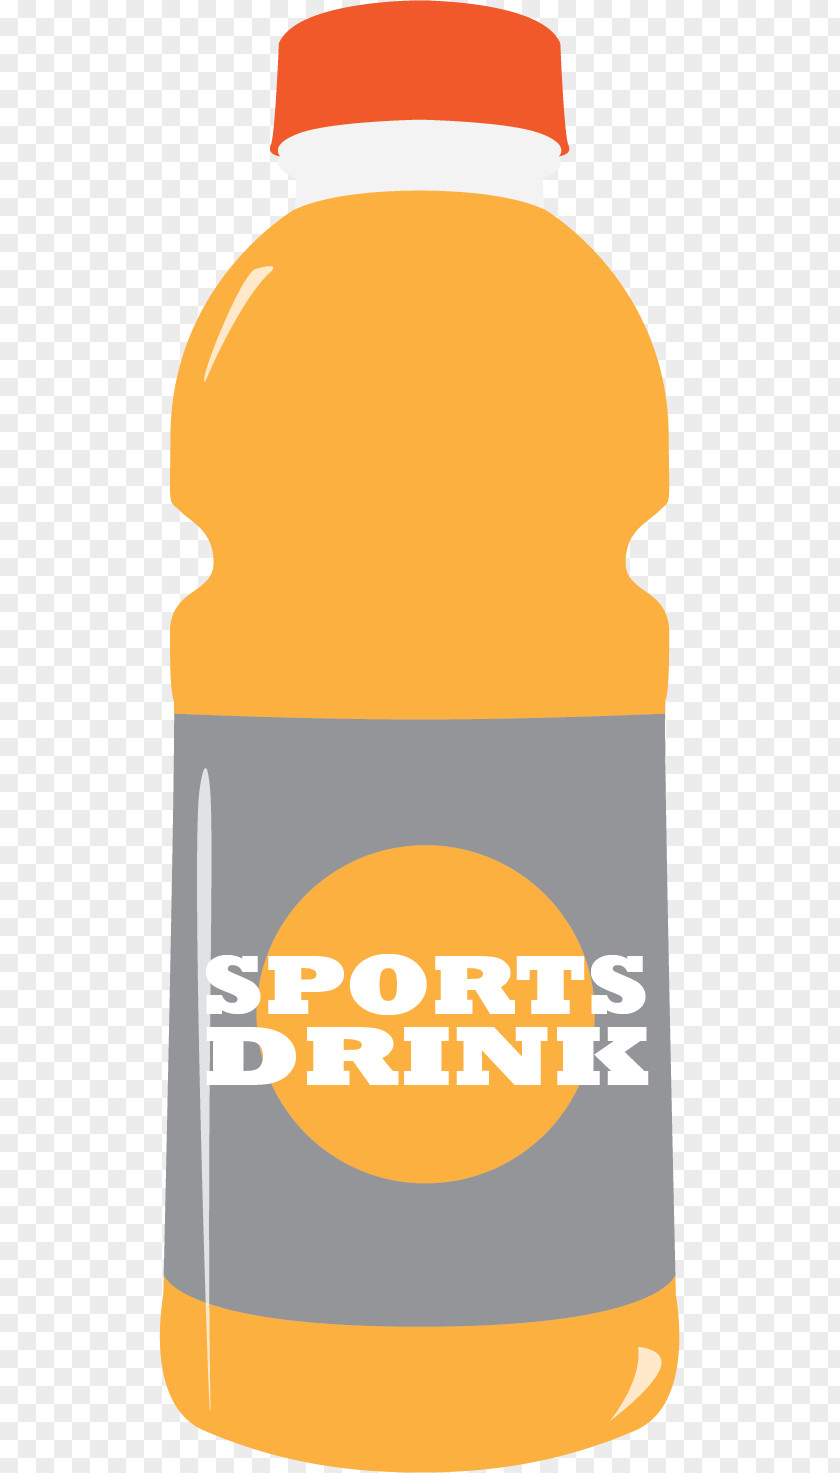 Sports Drink & Energy Drinks Fizzy Iced Tea Clip Art PNG